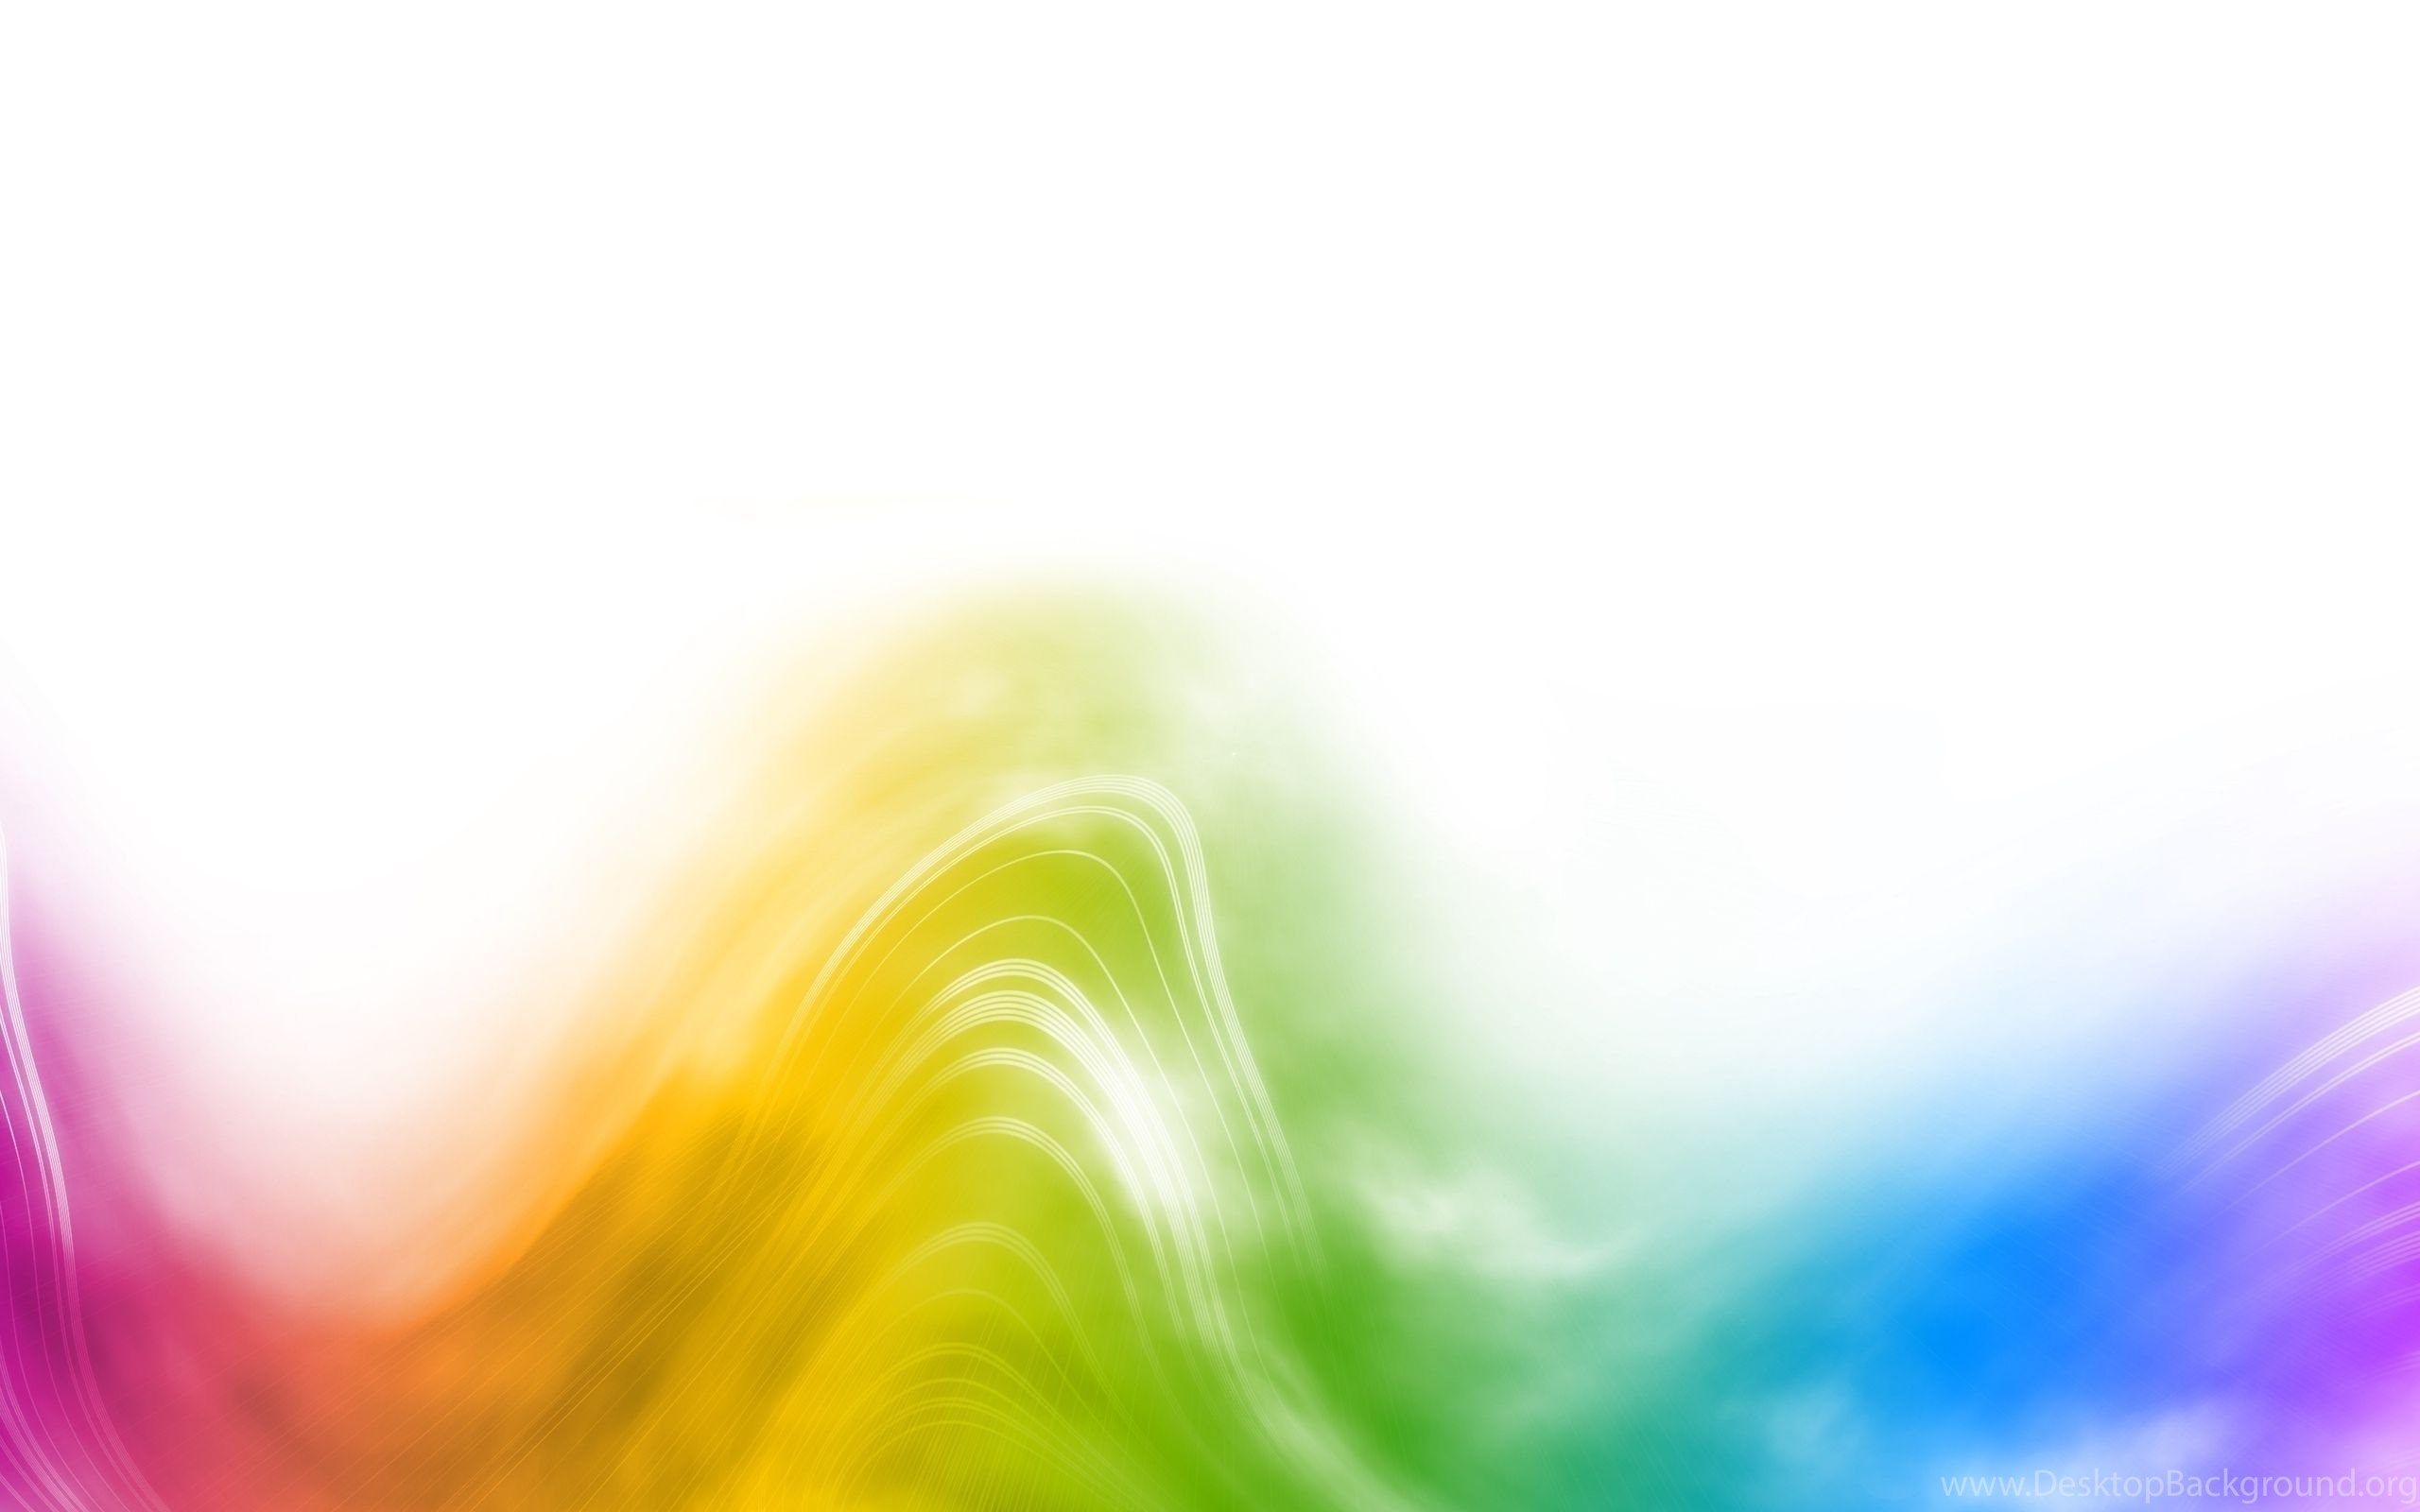 Download Wallpaper 2560x1600 Lines, Wavy, Colorful, Abstract. Desktop Background